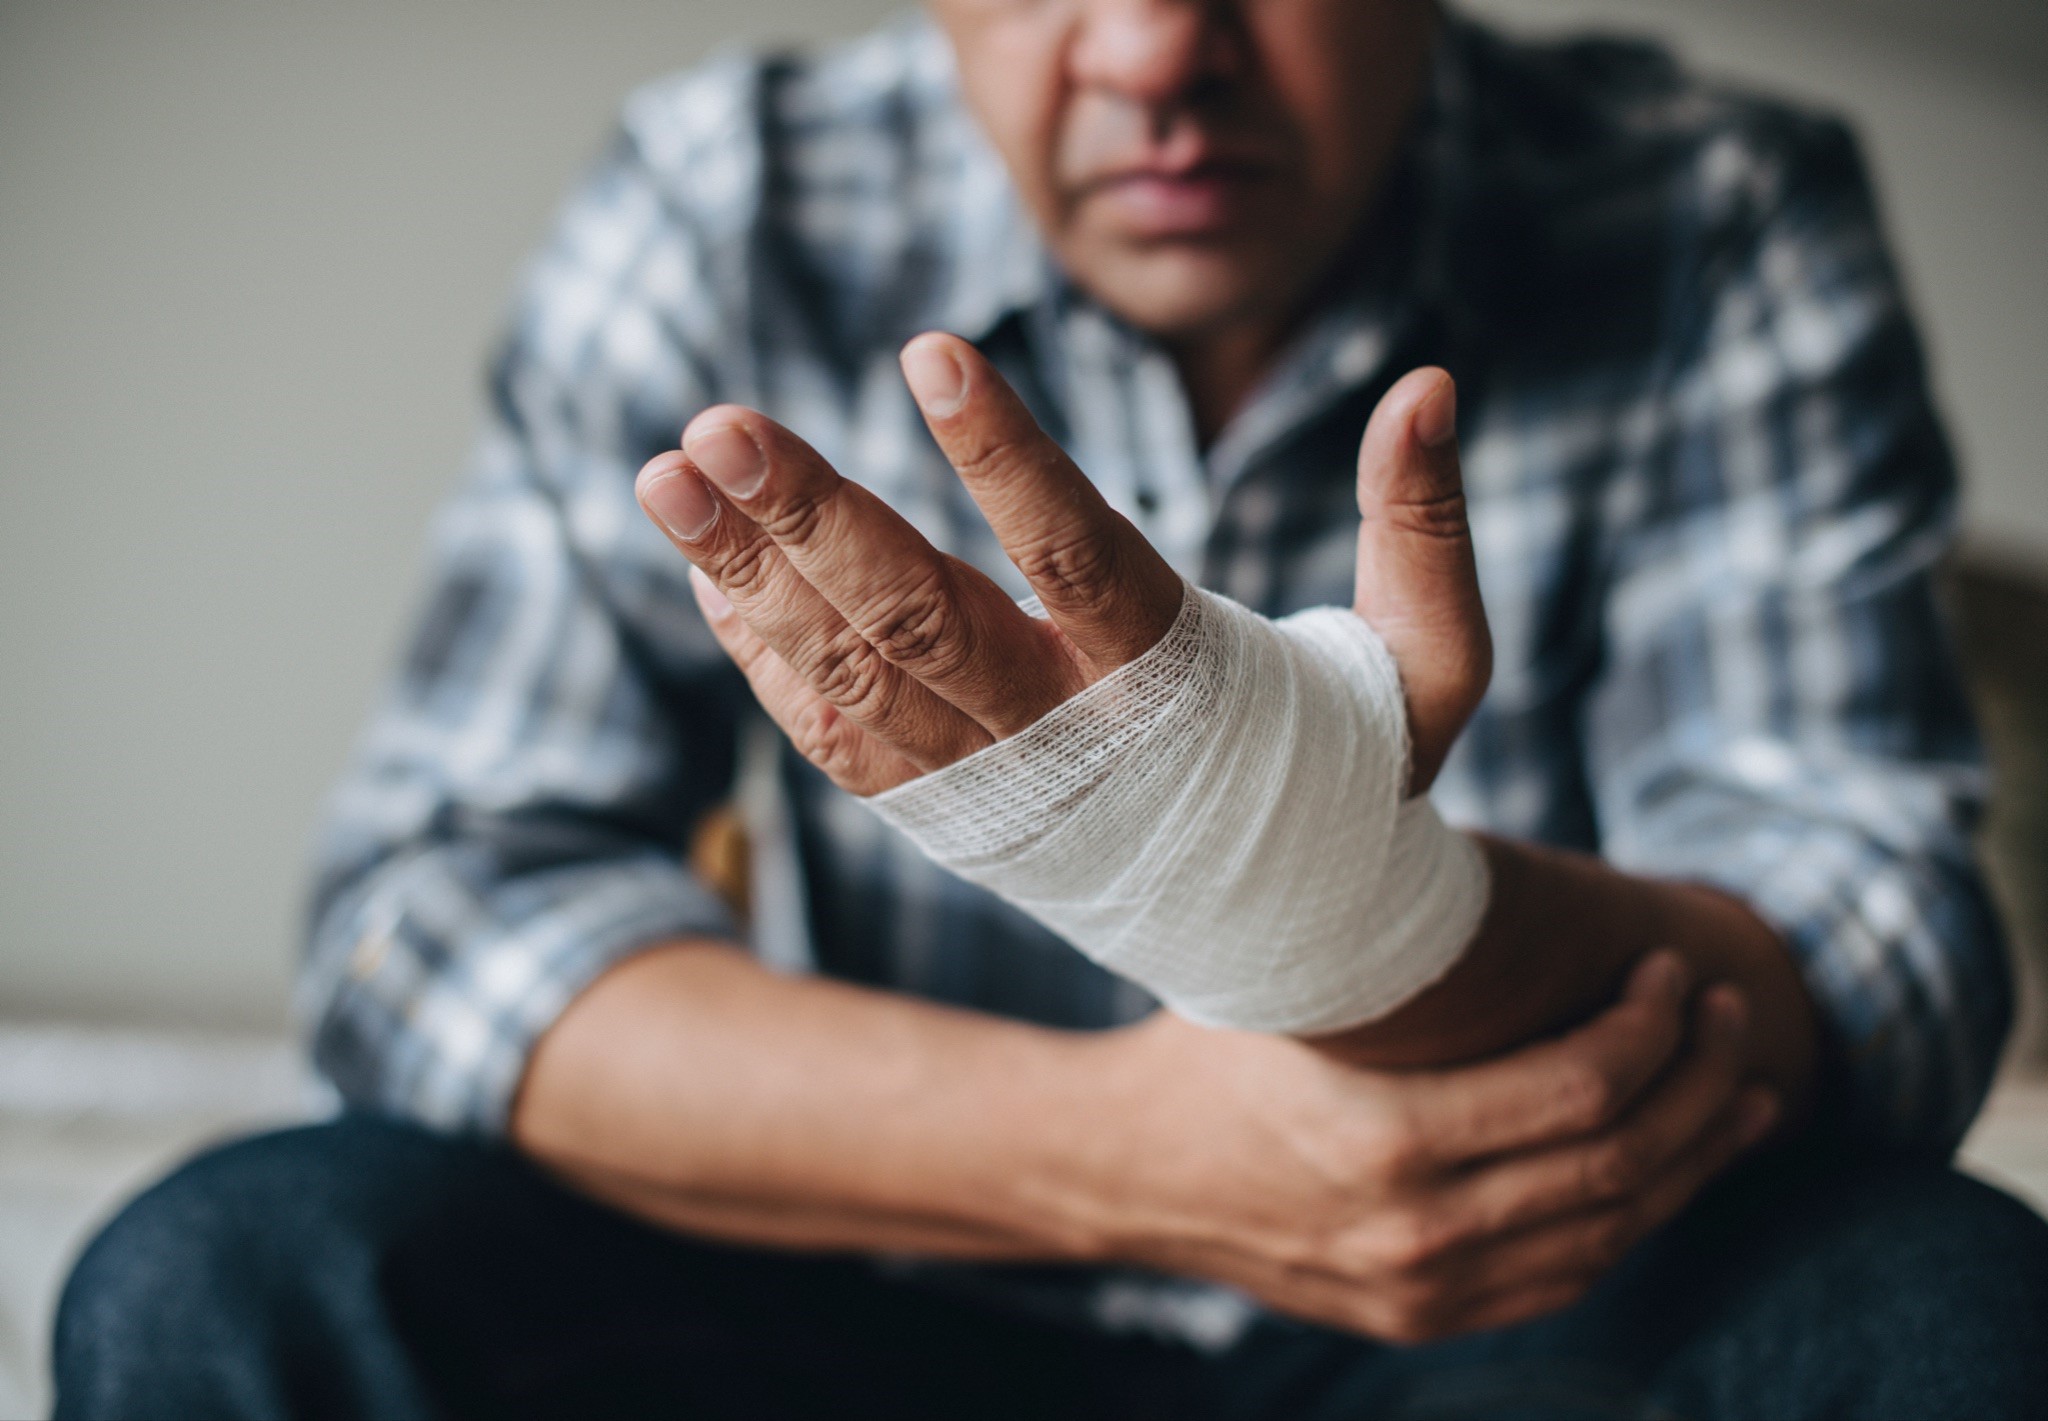 A closeup of a man sitting down and examining his hand that is wrapped in a bandage.